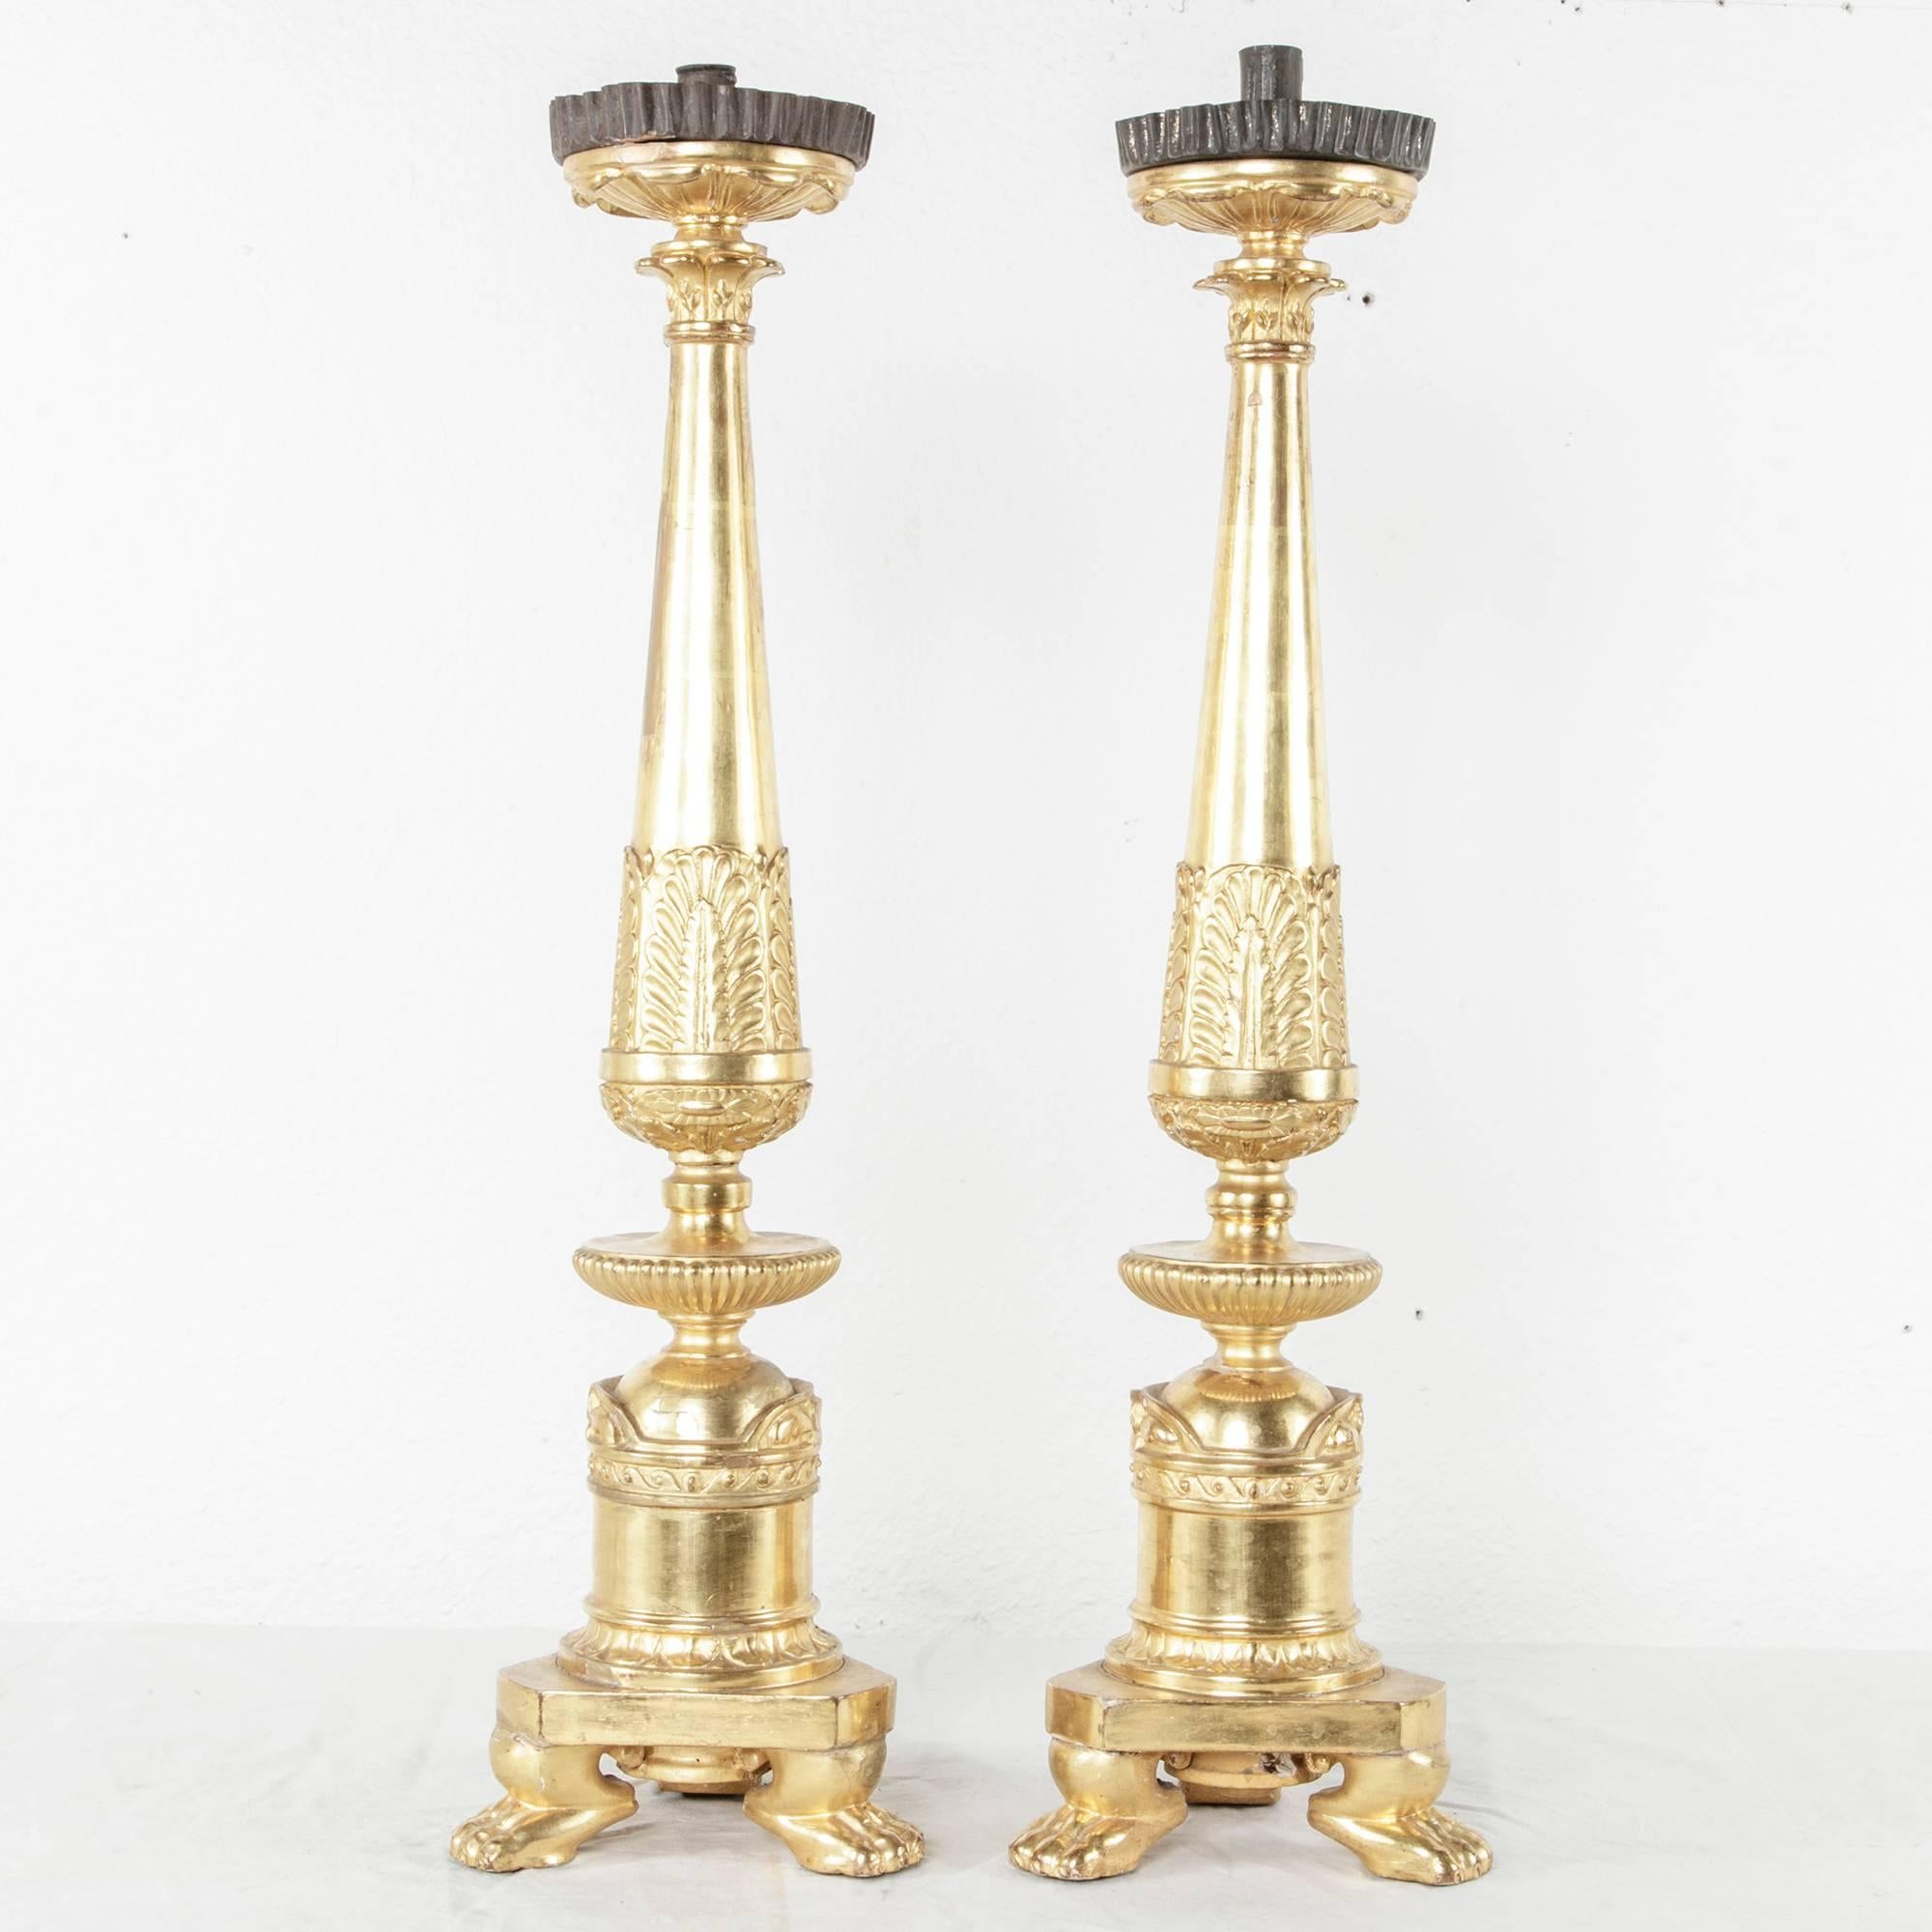 Early 19th Century French Empire Period Giltwood Candlesticks or Prickets For Sale 3